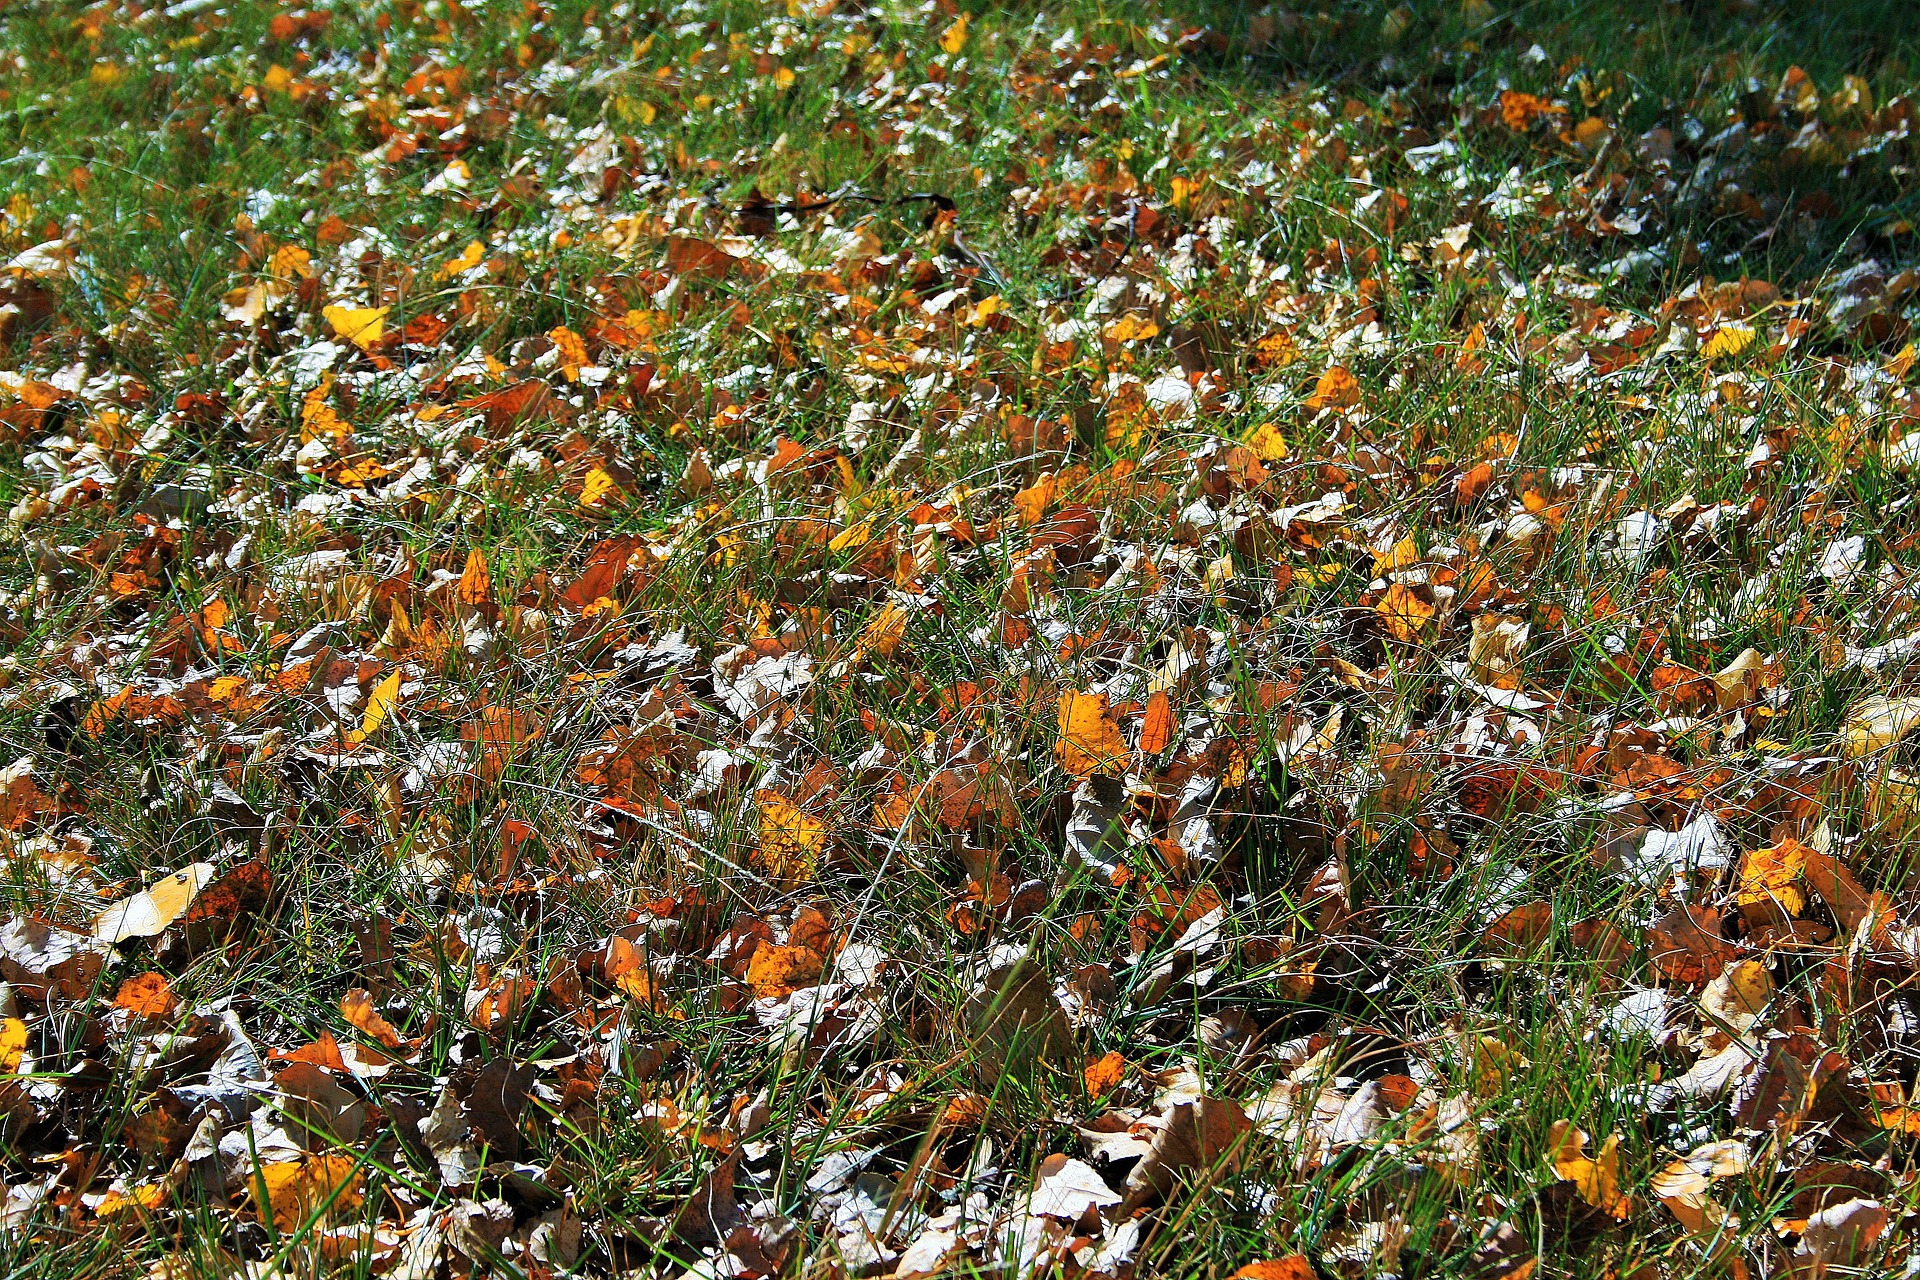 leaves-on-lawn-g8cb6aa0ac_1920